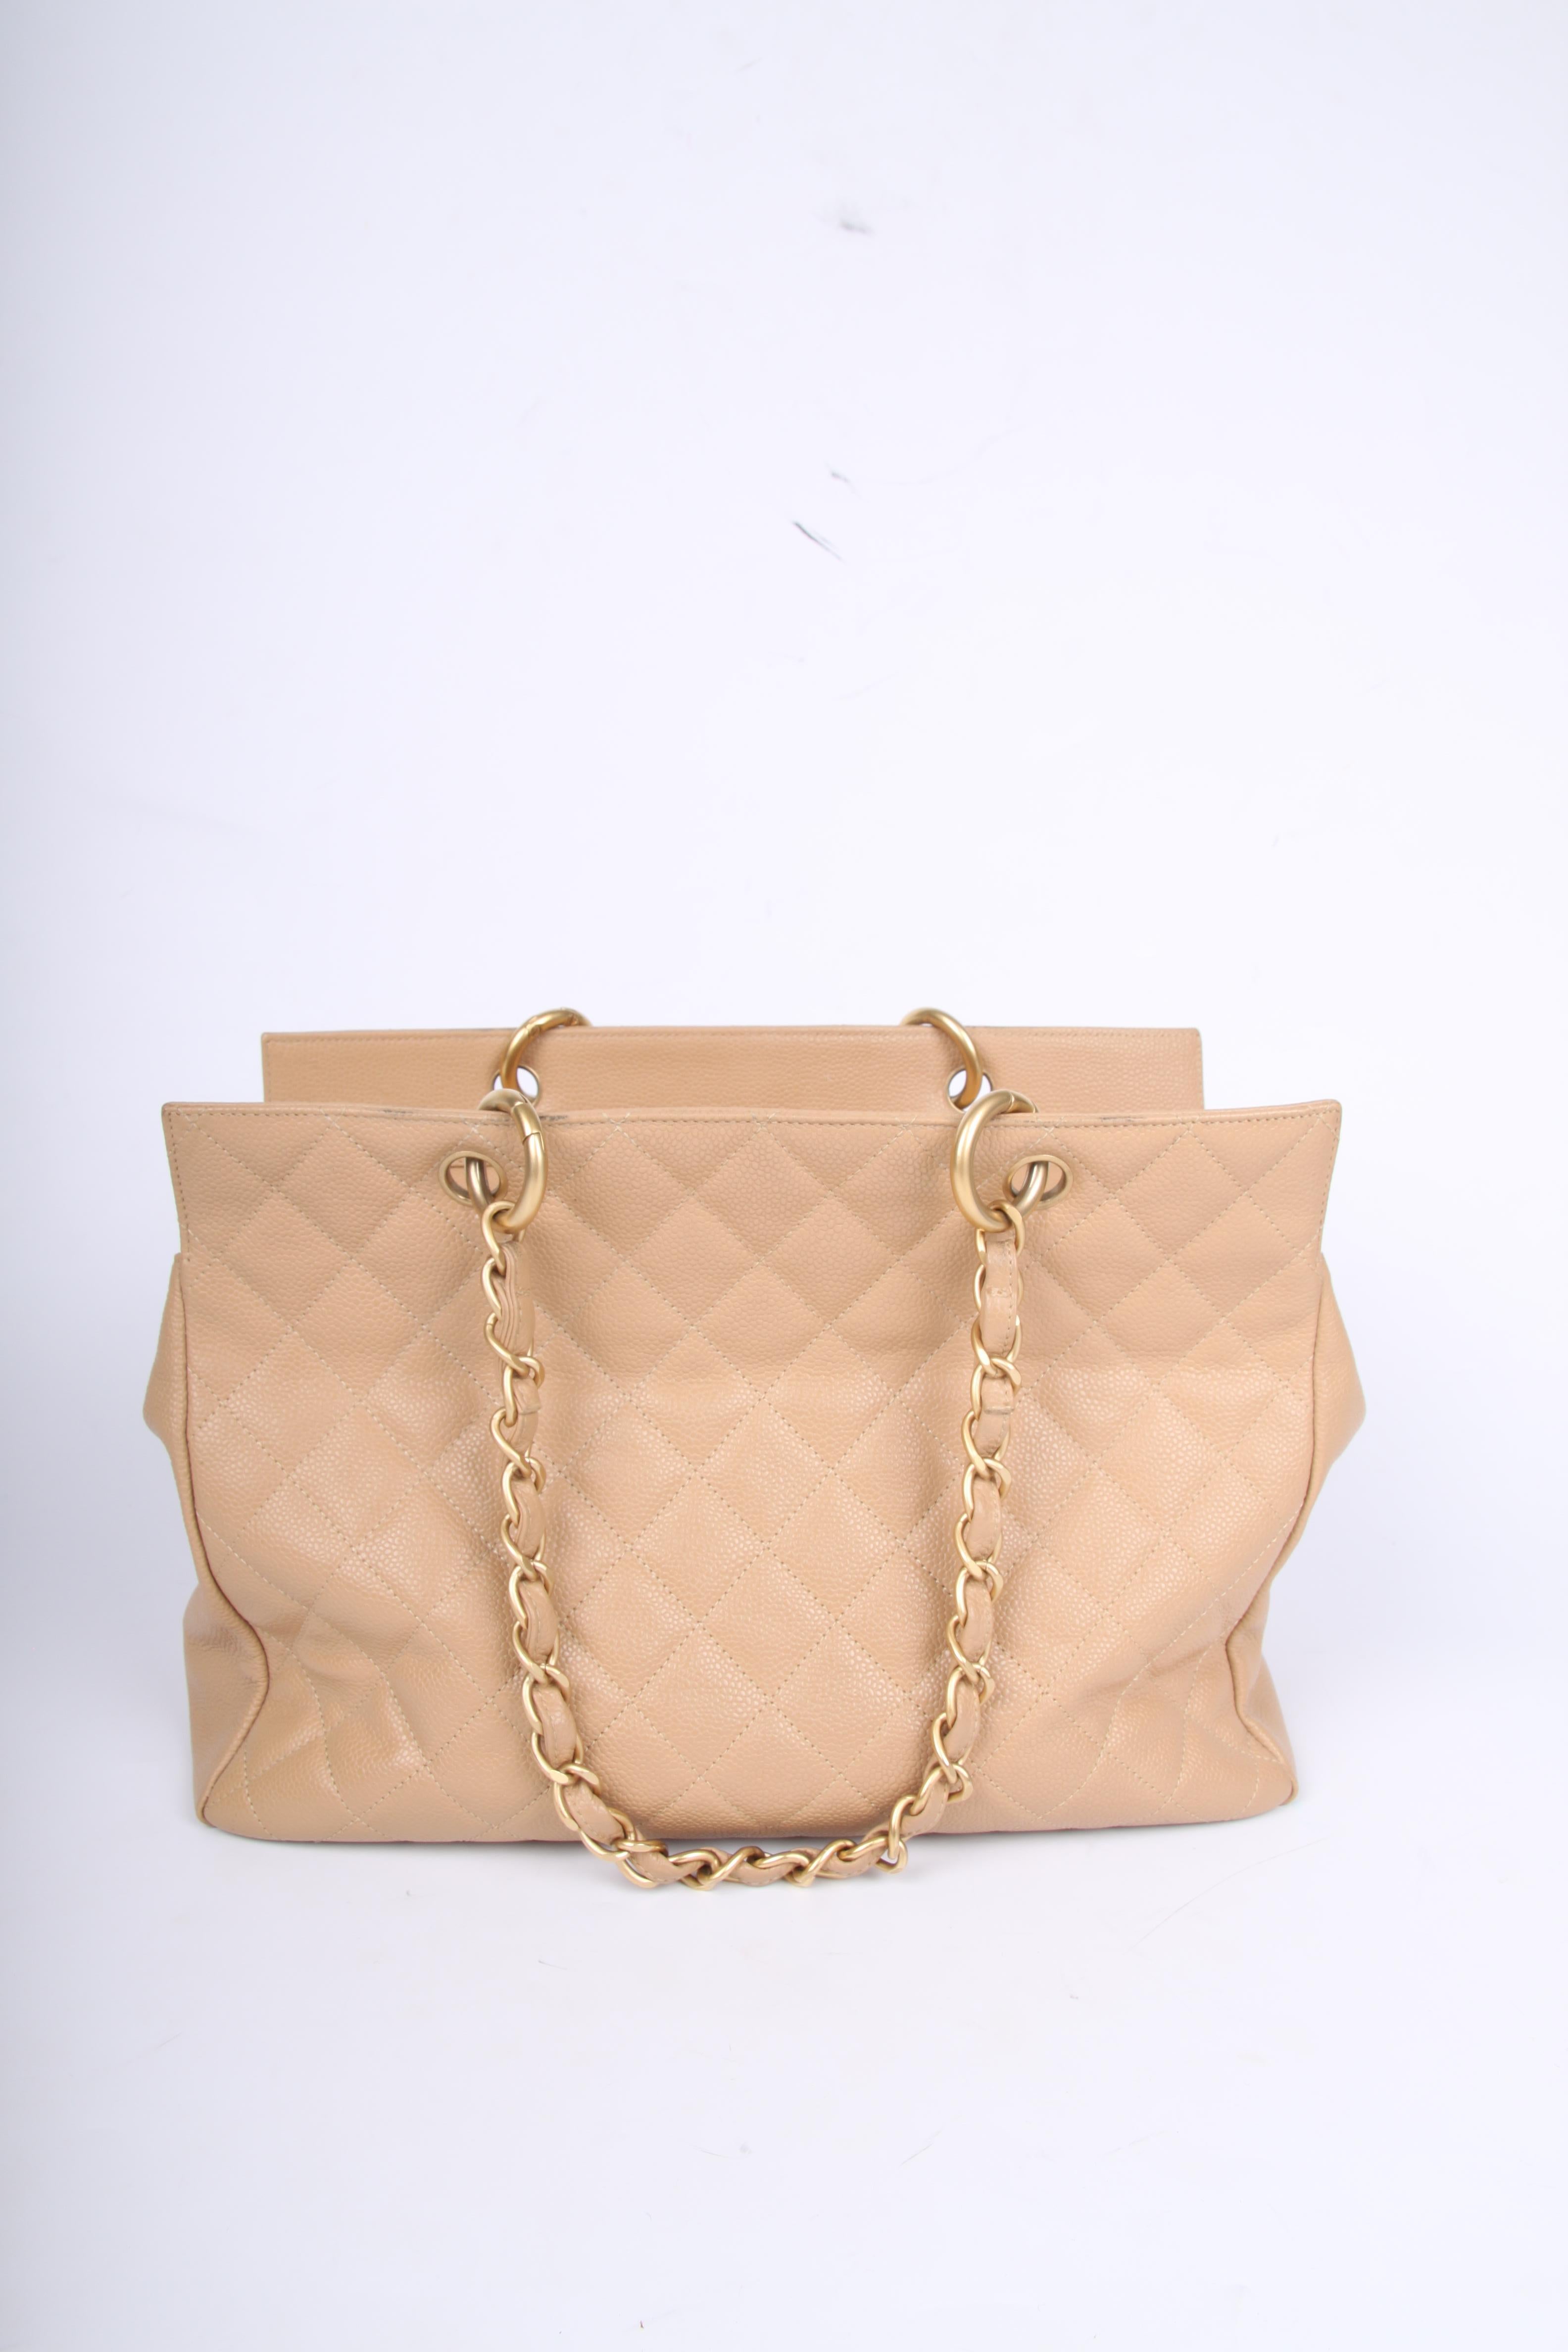 We don't see this classic bag by Chanel very often, but it is a true beauty! Timeless.

A spacious shopper with matte golden hardware and beige caviar leather. Large interlocking CC at the front of this quilted bag. Top closure with a zipper. One